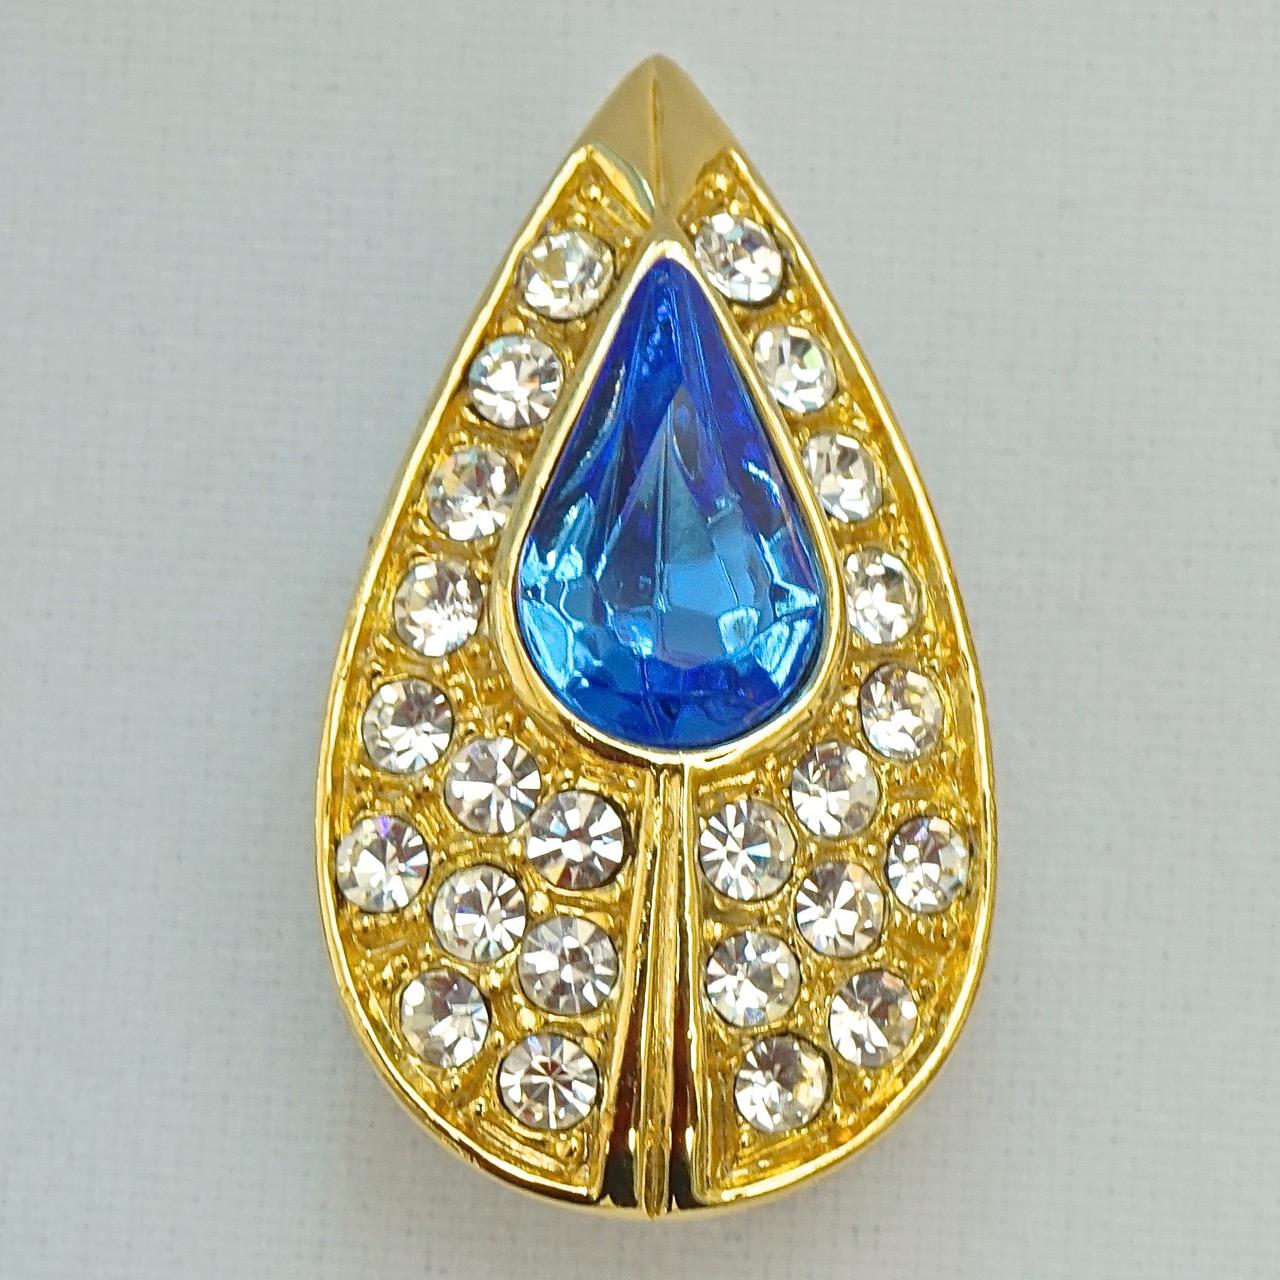 
Fabulous gold plated tear drop clip on earrings, set with lovely azure blue glass stones and clear faceted crystals. Measuring length 3cm / 1.1 inch by width 1.7cm / .67 inch. The earrings are in very good condition. Circa 1980s.

These beautiful